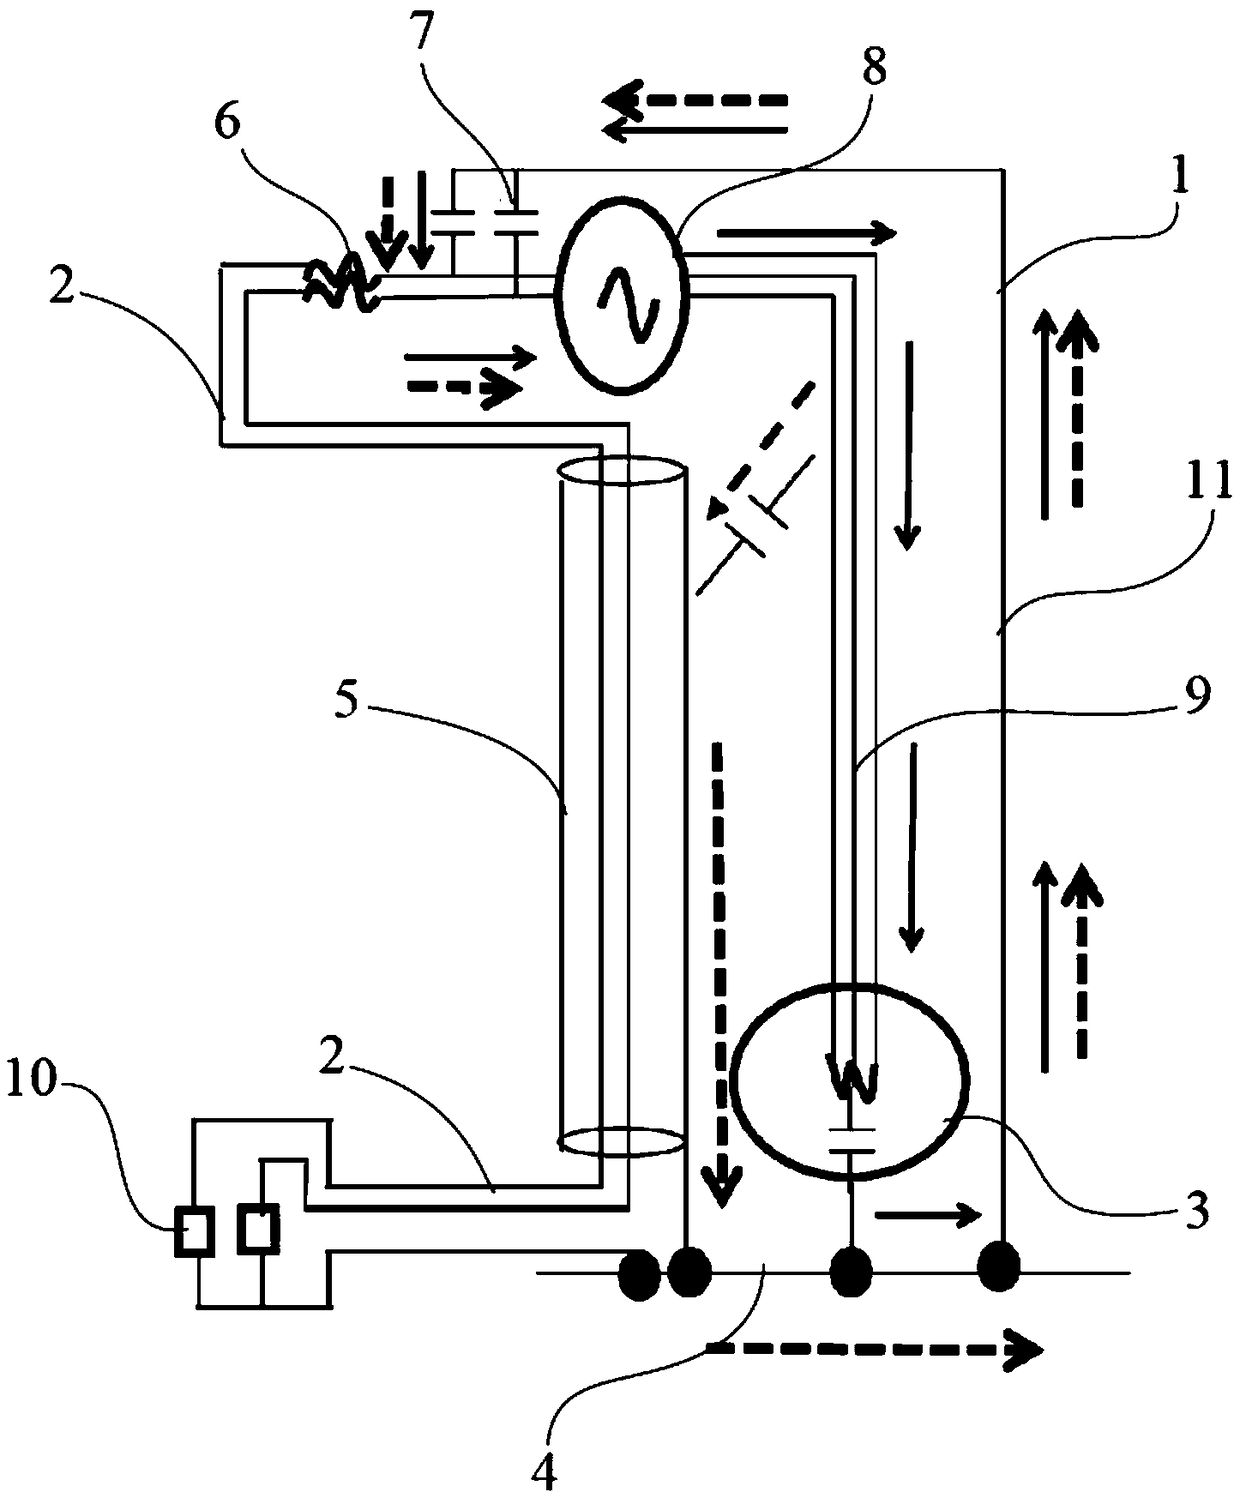 Interference reduction circuit of refrigerator and refrigerator